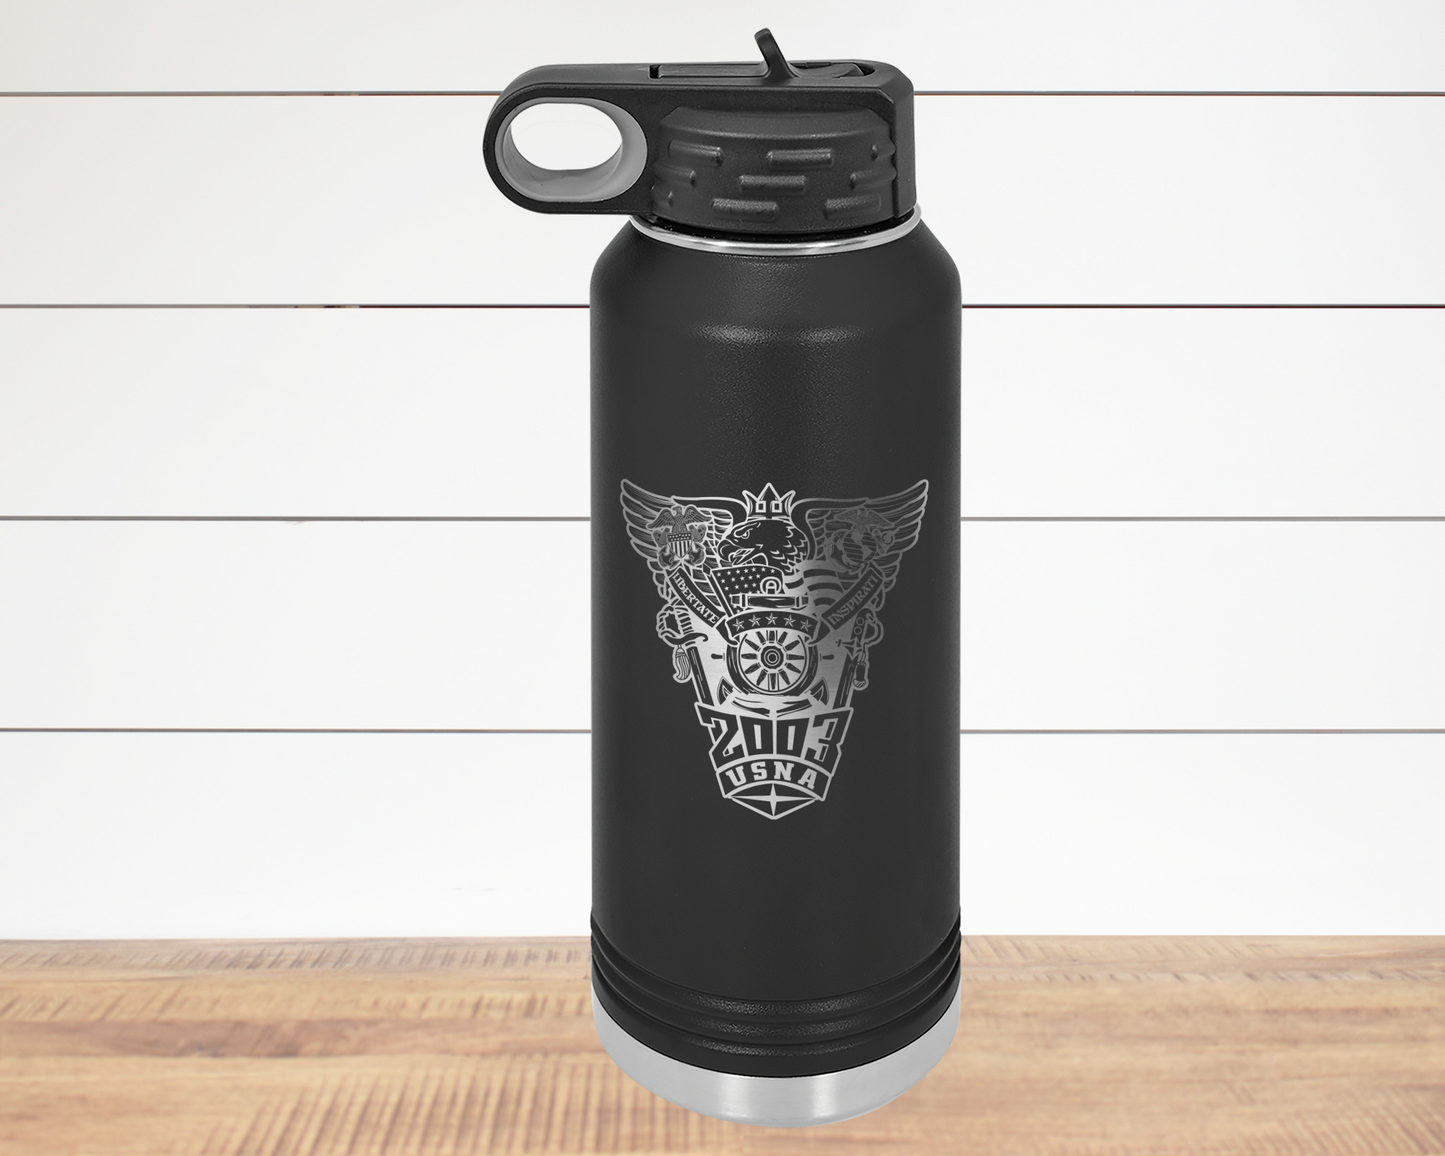 36oz Stainless Steel Water Bottle - USNA Class of 2003 Crest